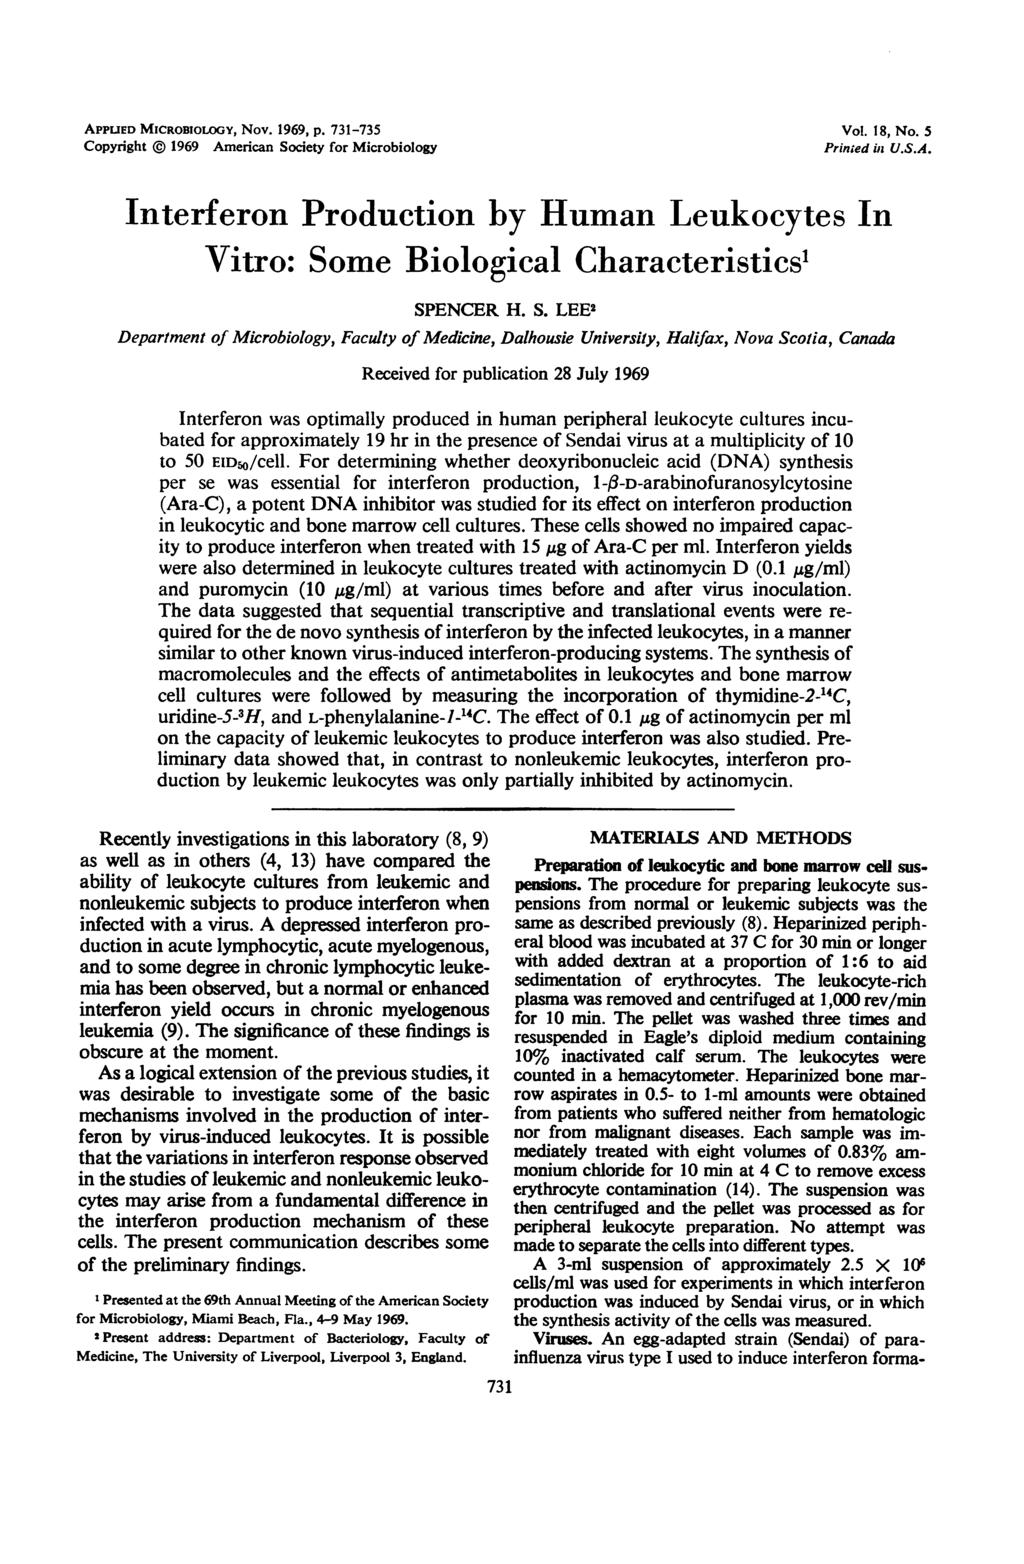 APPED MICROBIOLOGY, Nov. 1969, p. 731-735 Copyright 1969 American Society for Microbiology Vol. 18, No. 5 Printed in.s.a. Interferon Production by Human Leukocytes In Vitro: Some Biological Characteristicsl SPENCER H.